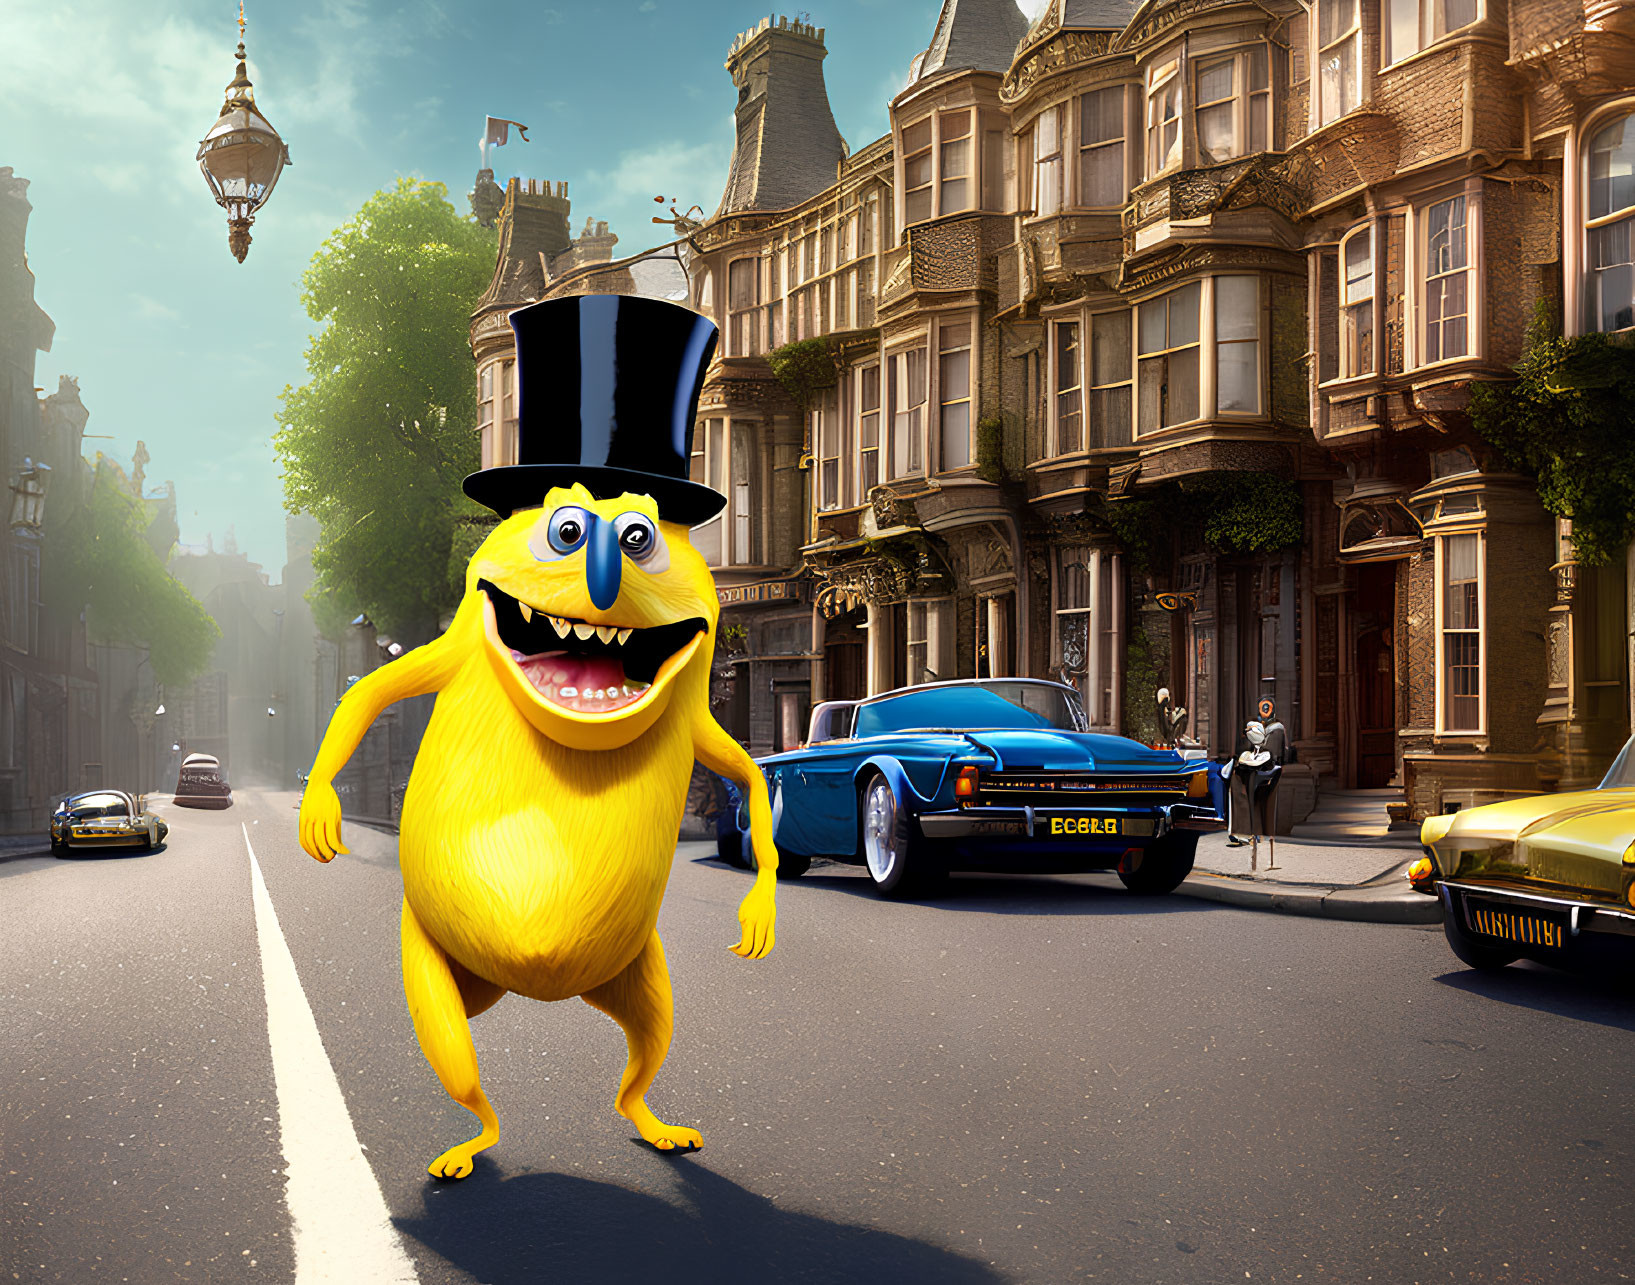 Yellow cartoon character in top hat on sunny street with vintage cars and townhouses